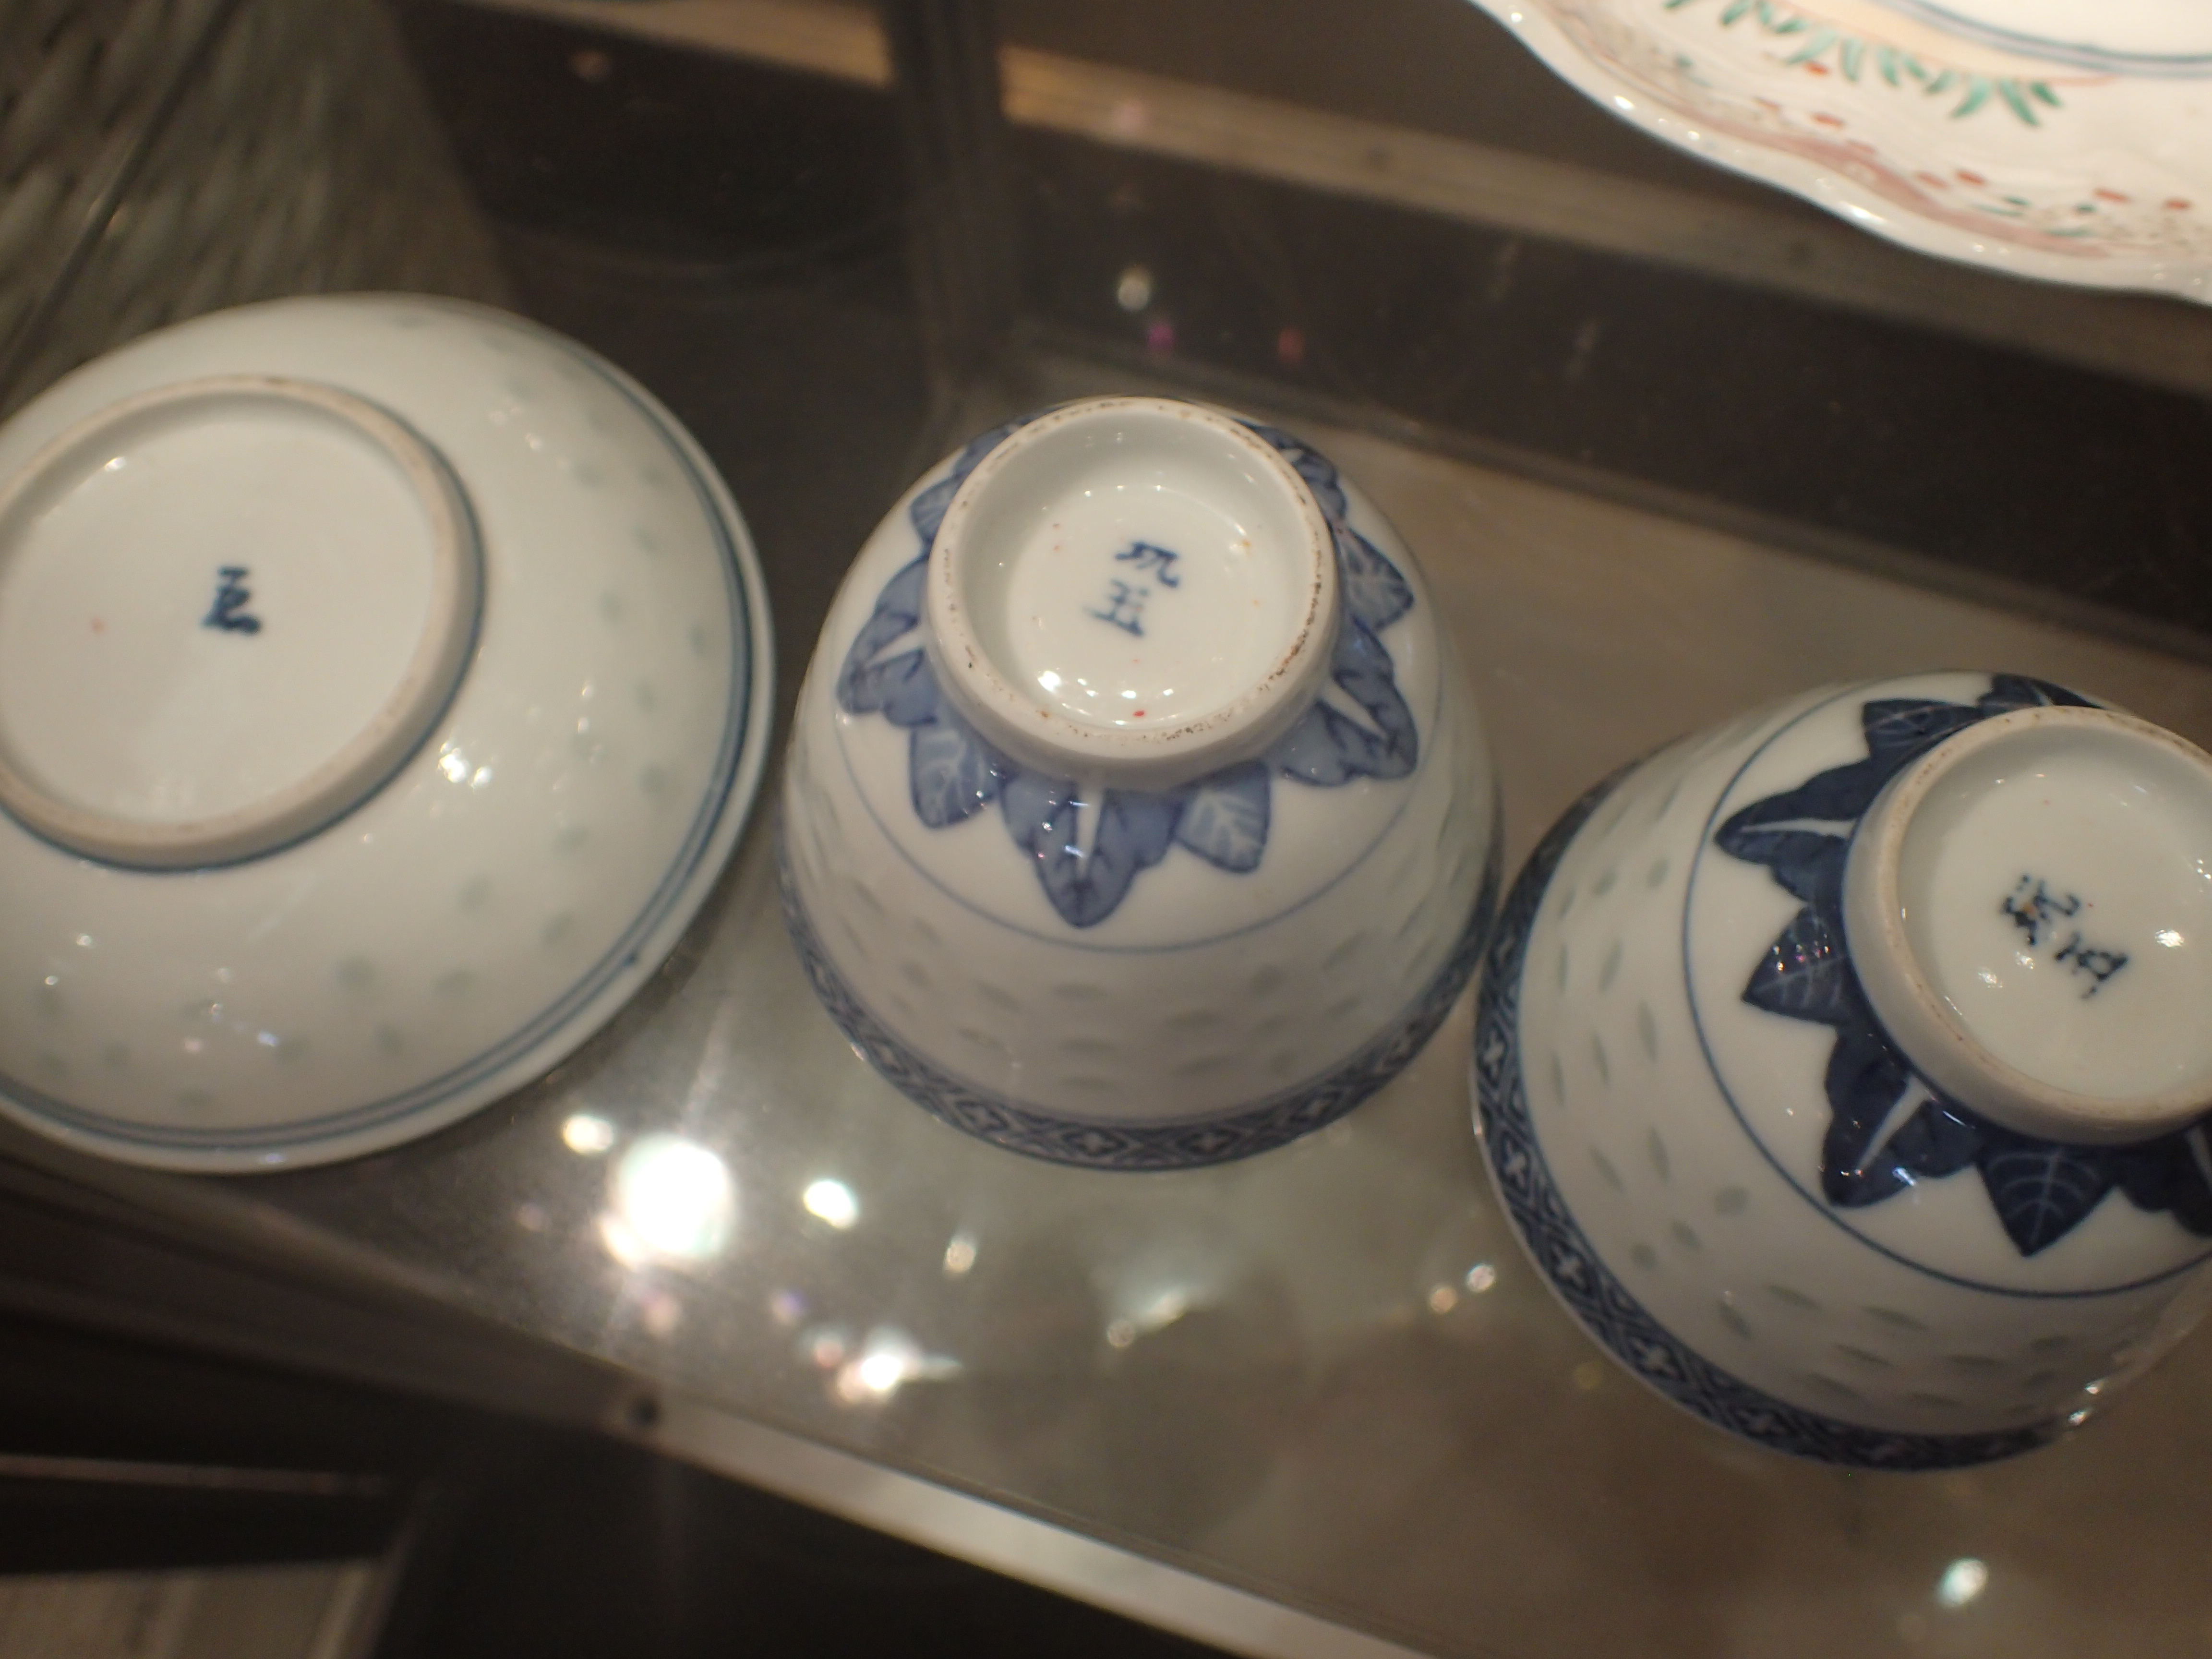 Two Chinese teabowls and saucers - Image 2 of 2